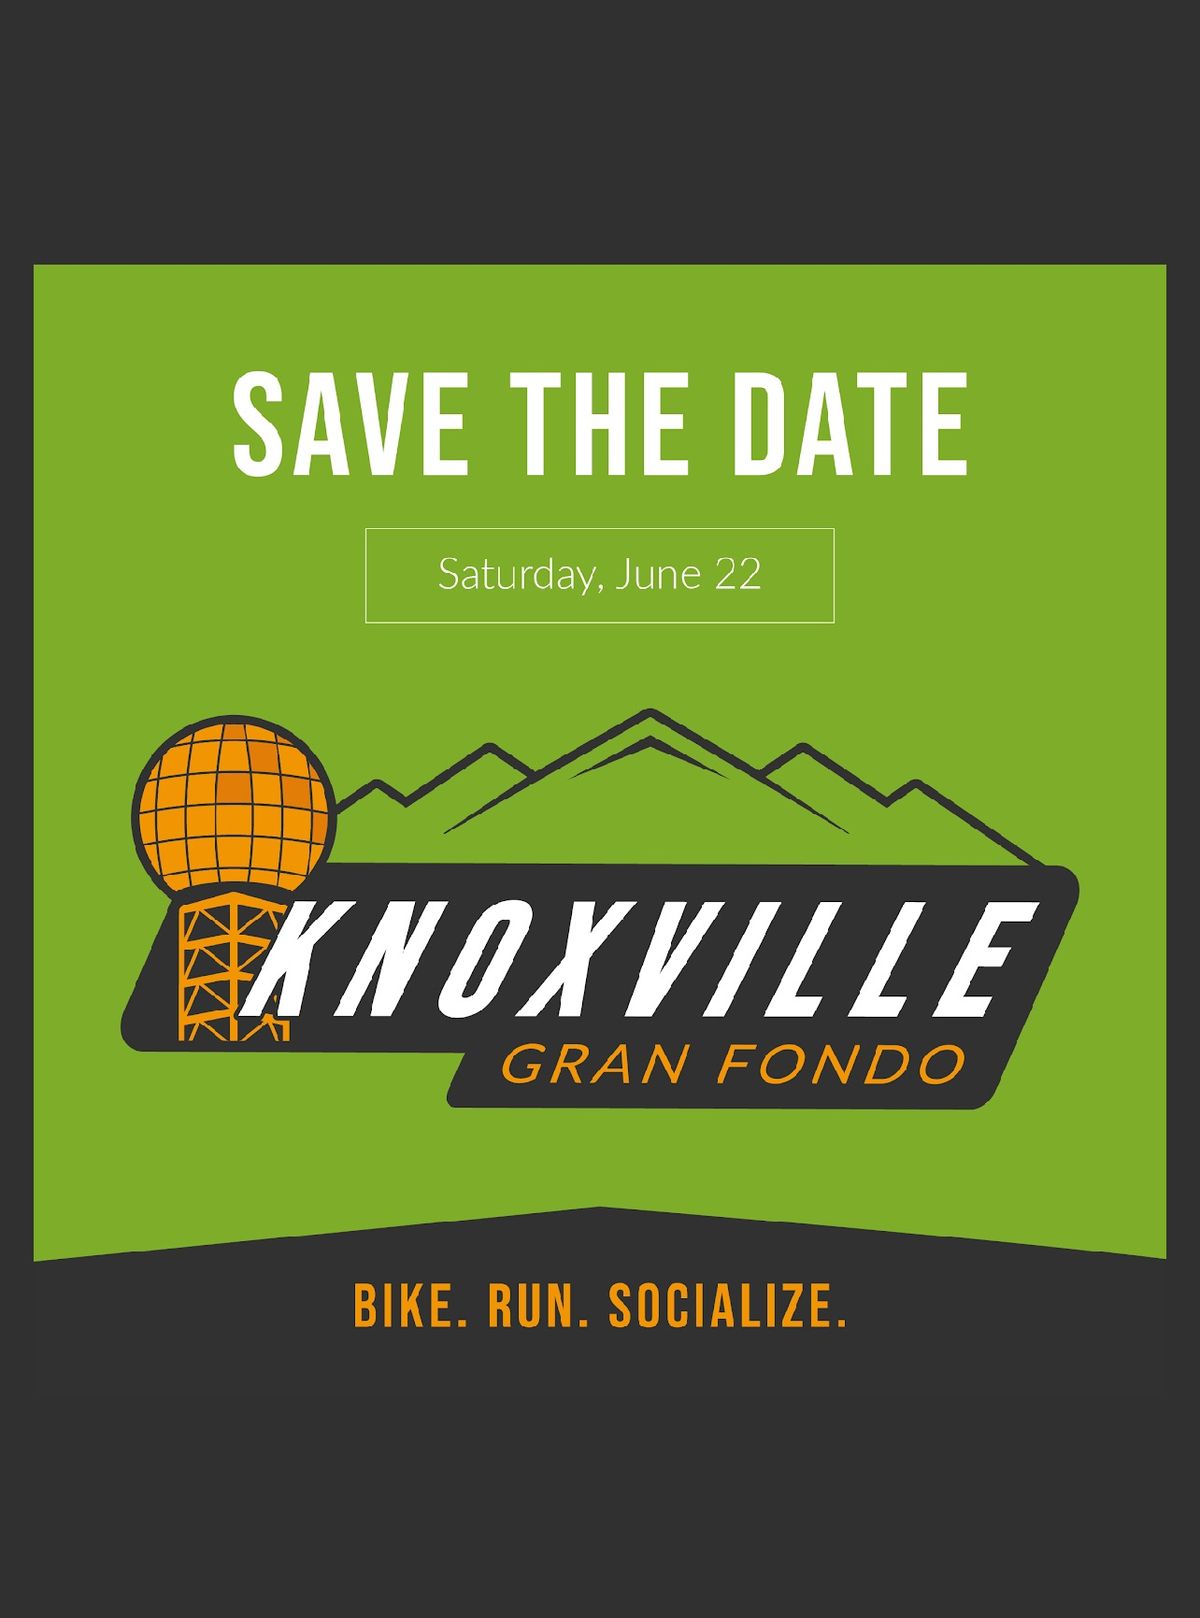 Knoxville Grand Fondo and Trail Run